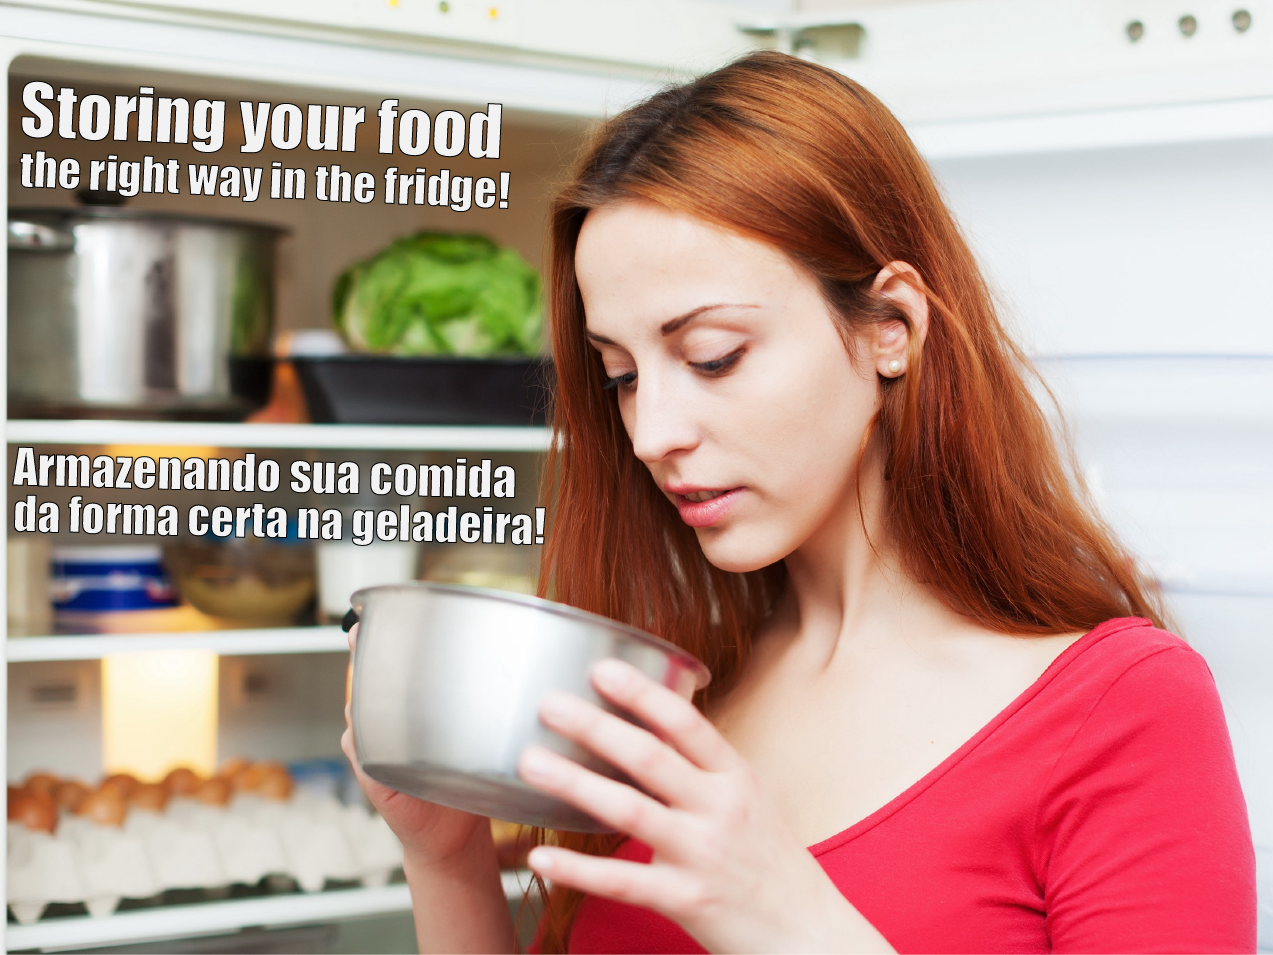 Storing your food the right way in the fridge!